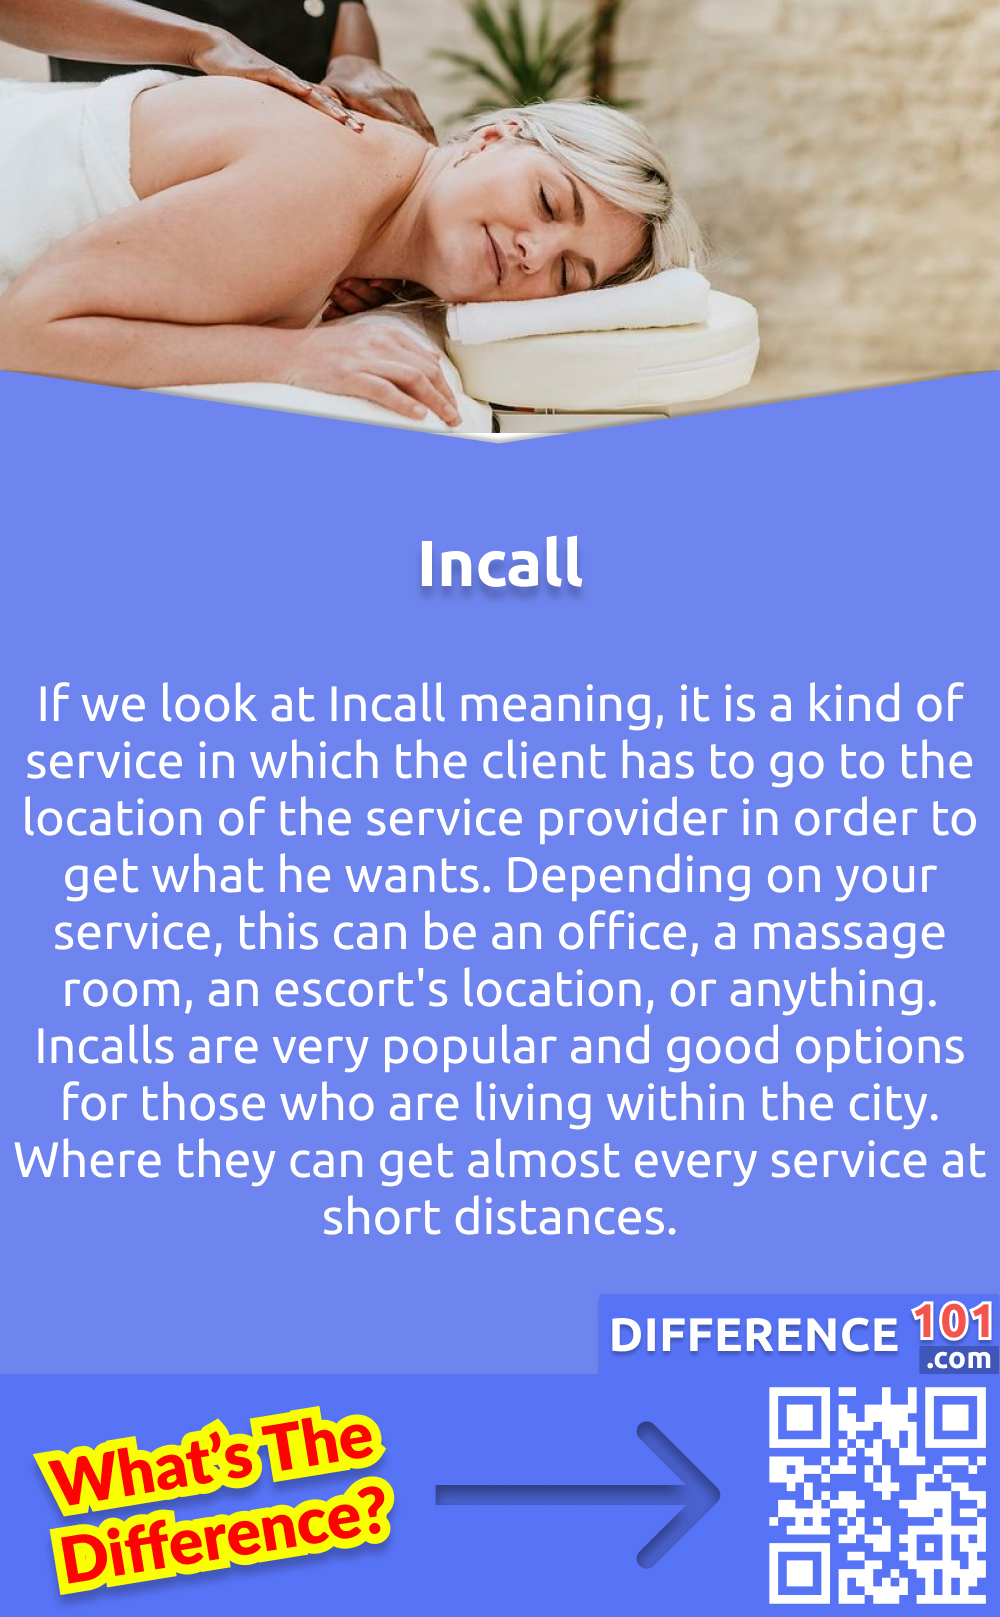 What Is An Incall? If we look at Incall meaning, it is a kind of service in which the client has to go to the location of the service provider in order to get what he wants. Depending on your service, this can be an office, a massage room, an escort's location, or anything. Incalls are very popular and good options for those who are living within the city. Where they can get almost every service at short distances. Incall services are also suitable for those people who avoid any kind of disturbance. A lot of people also choose incall services over others because it feels safe as the client’s location is not exposed to anyone else.